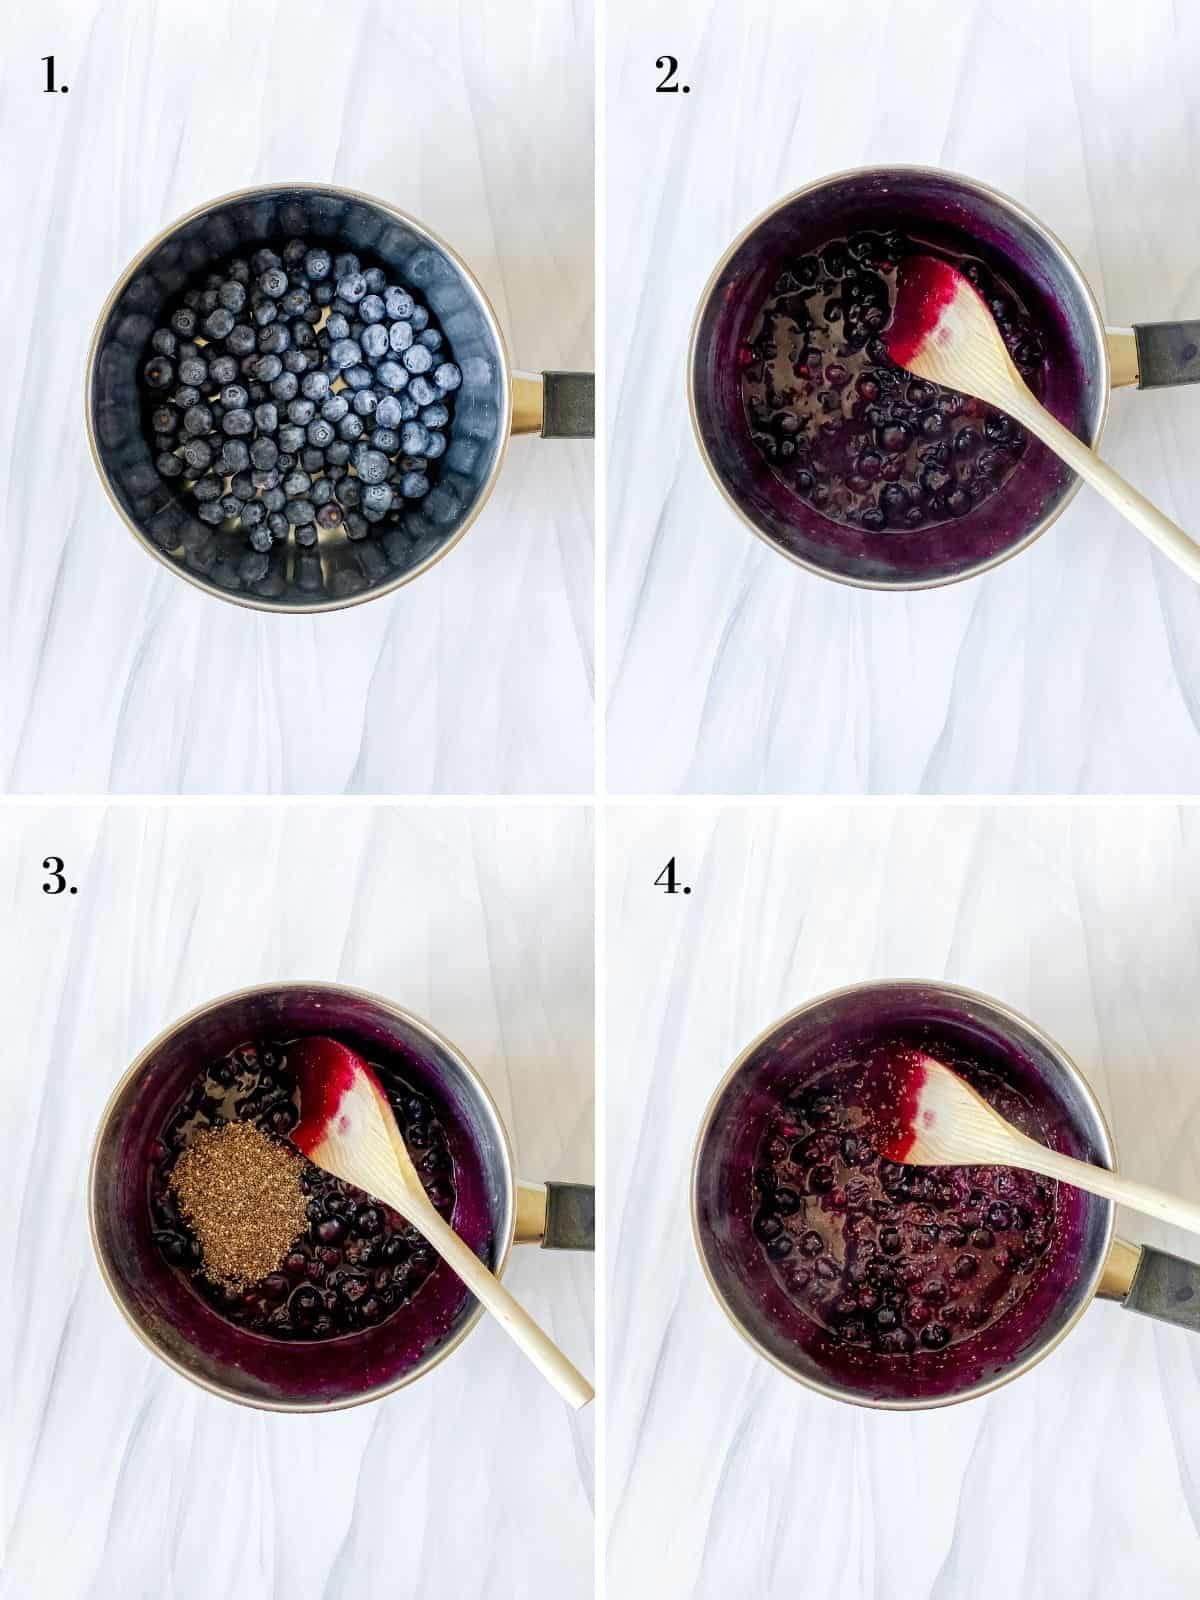 process shots for making blueberry chia jam.